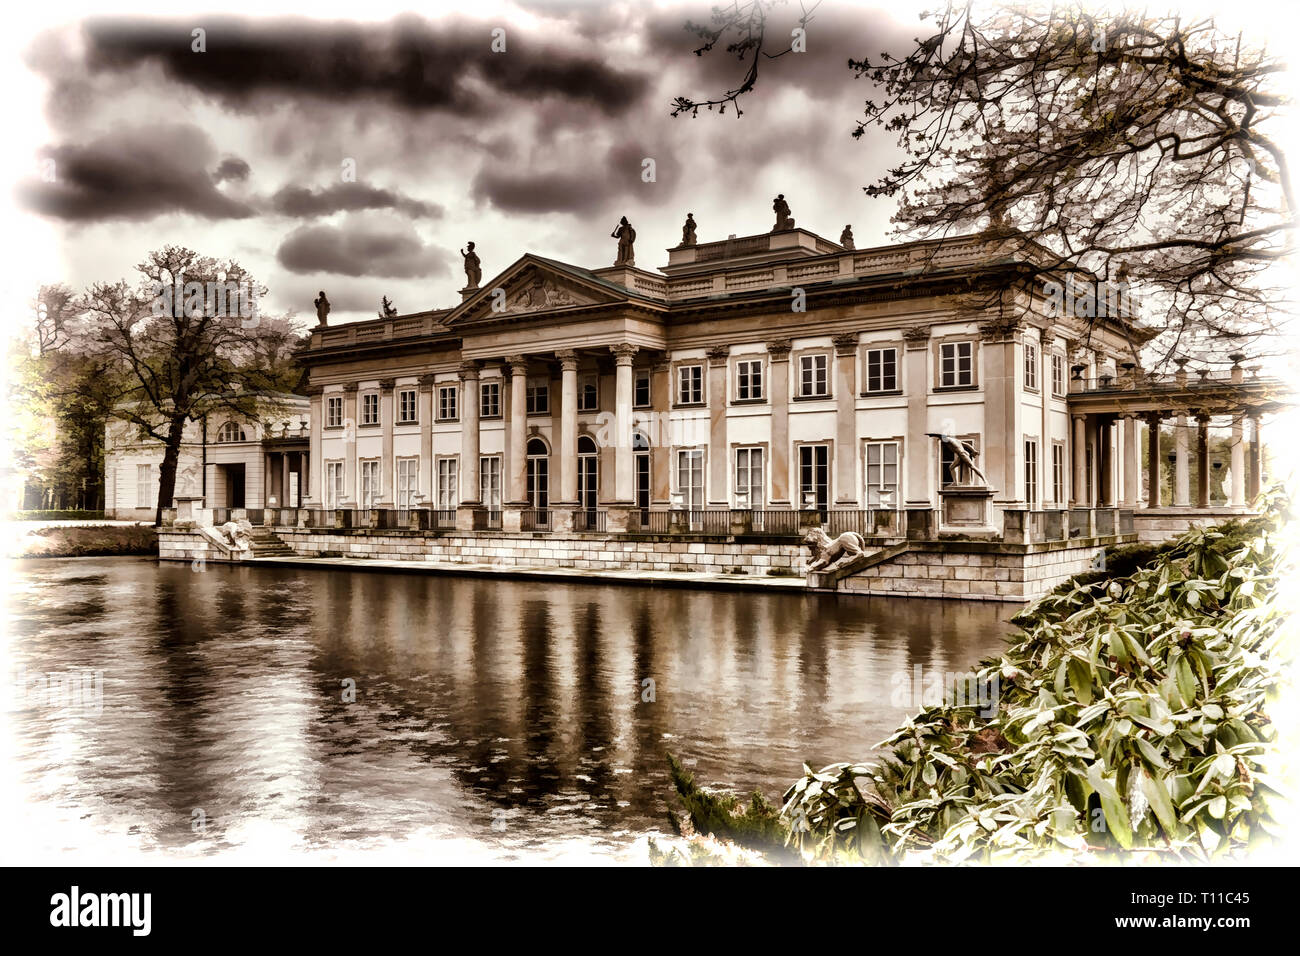 Palace on the Water in Lazienki Park in Warsaw Stock Photo